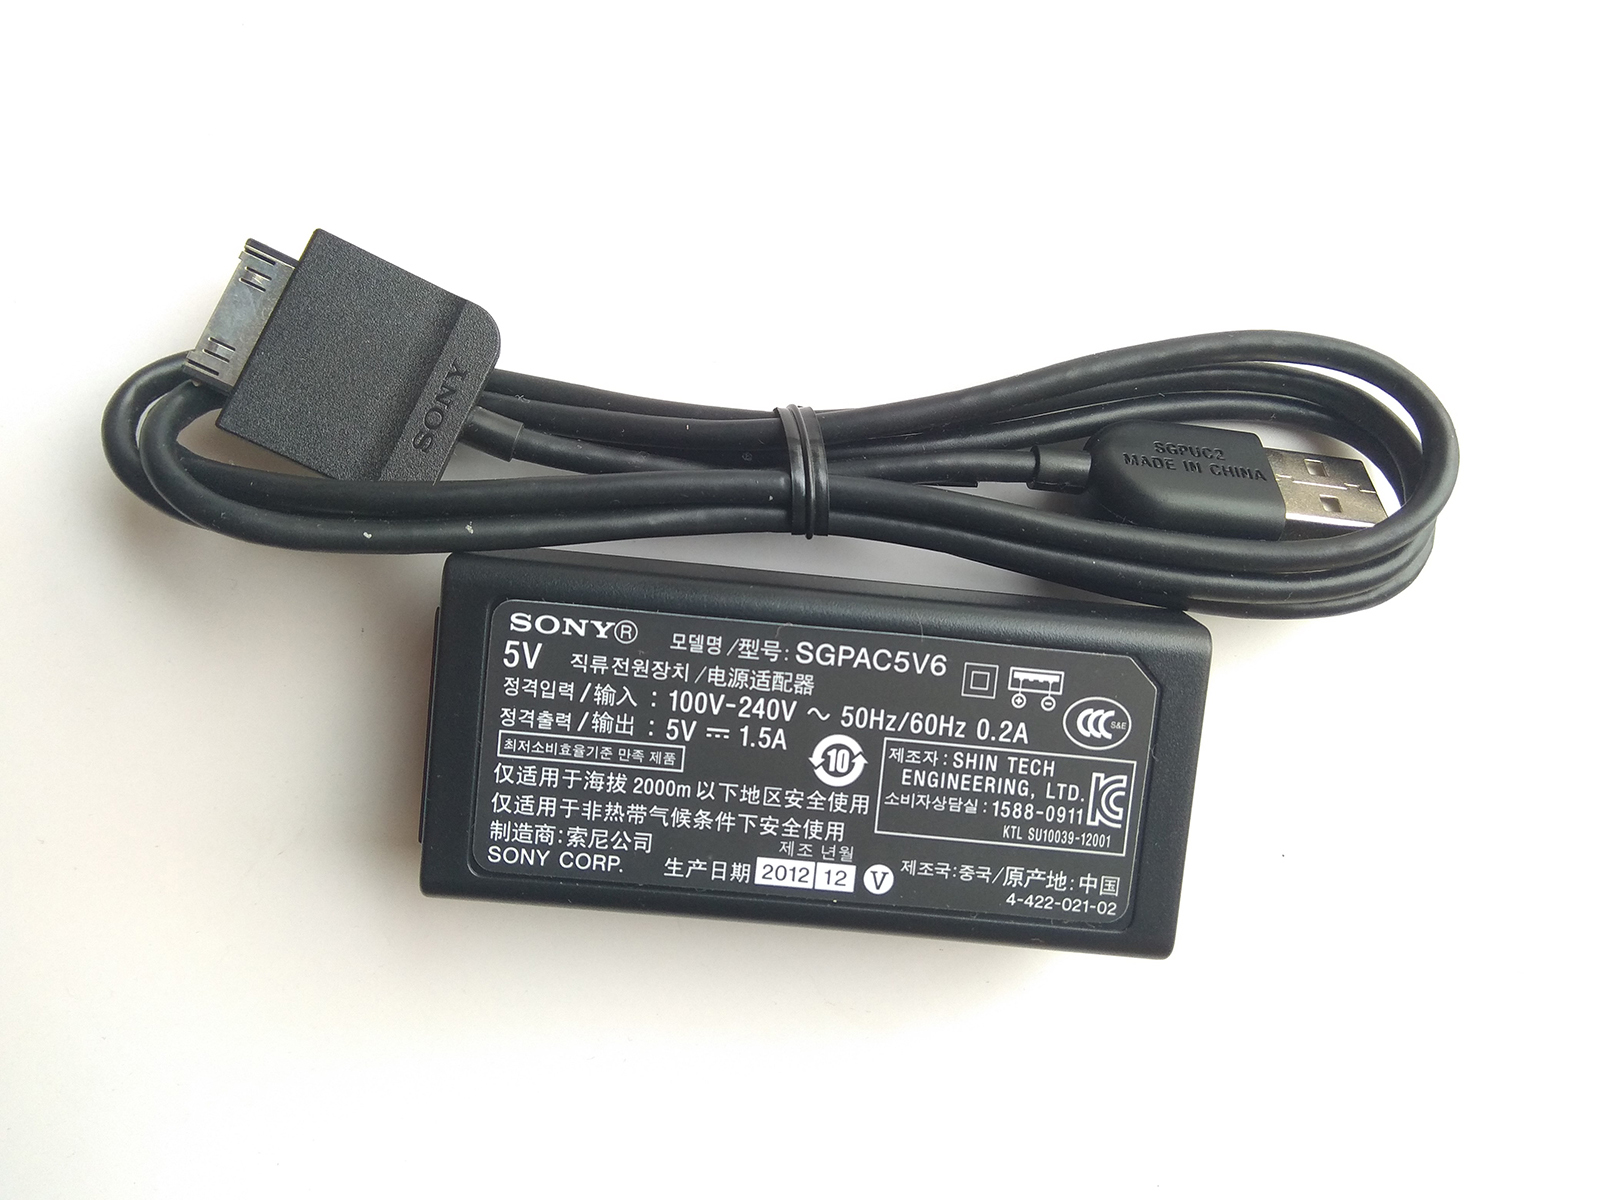 NEW 5V 1.5A Sony SGPT133AU/S Xperia Tablet SGPAC5V6 USB Charger AC Adapter Power Supply